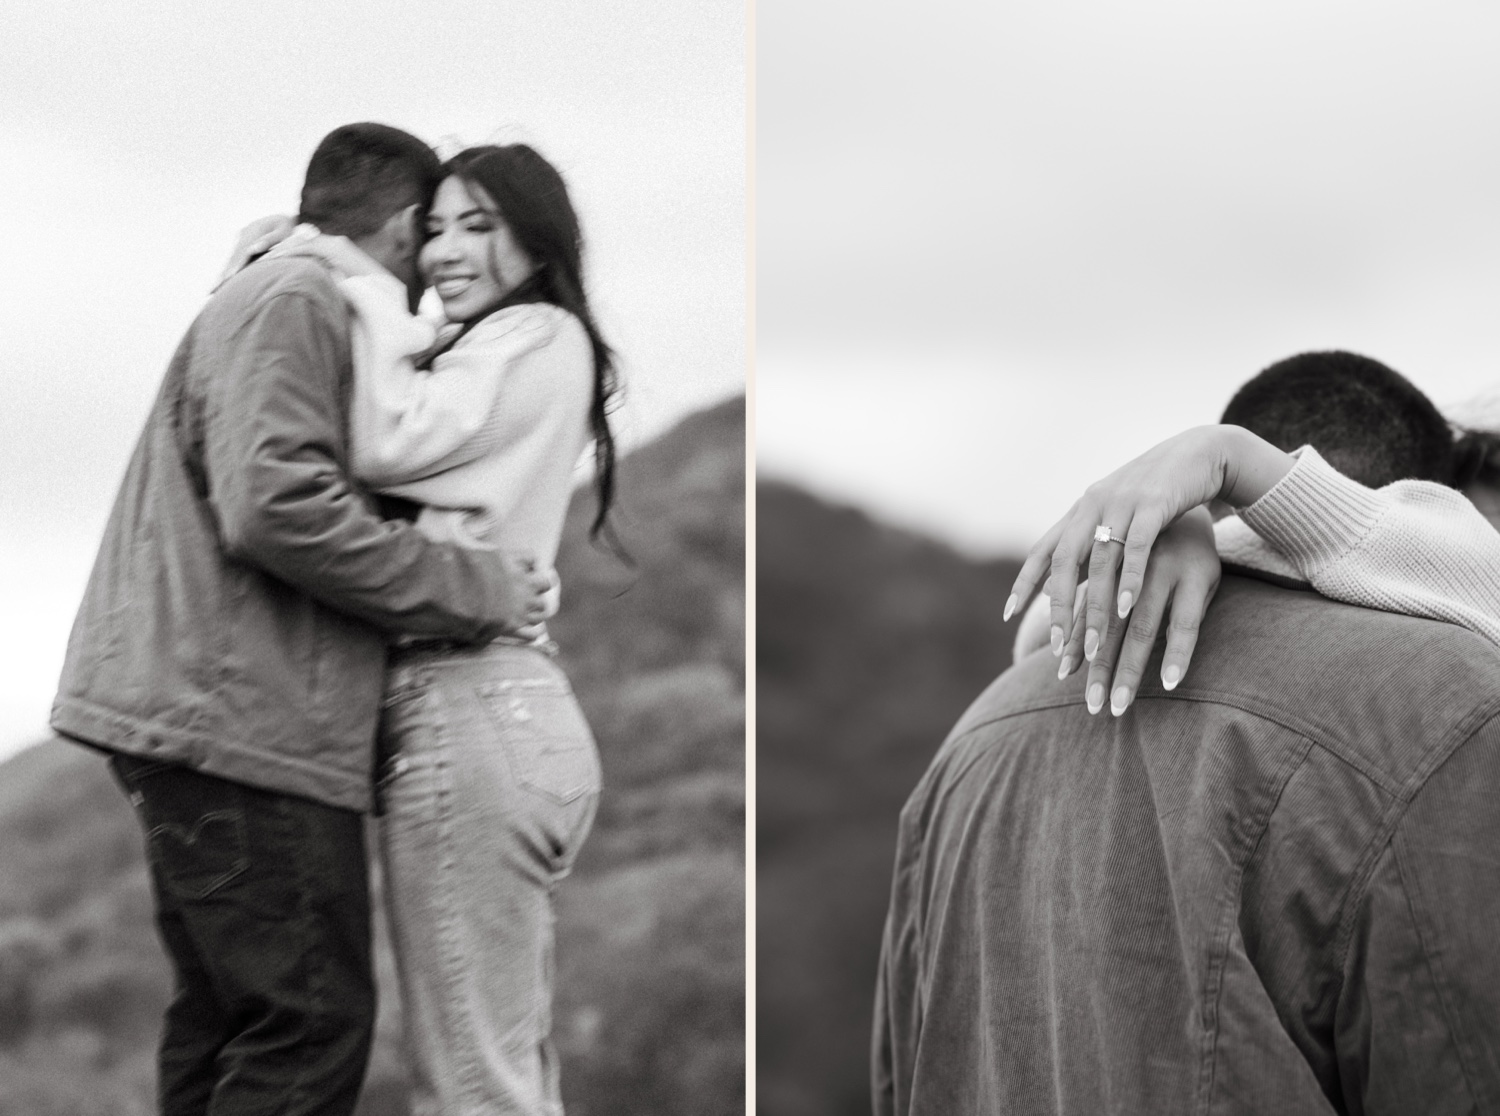 movement photo couple on mountainside casual jeans and jacket styling engagement ring details